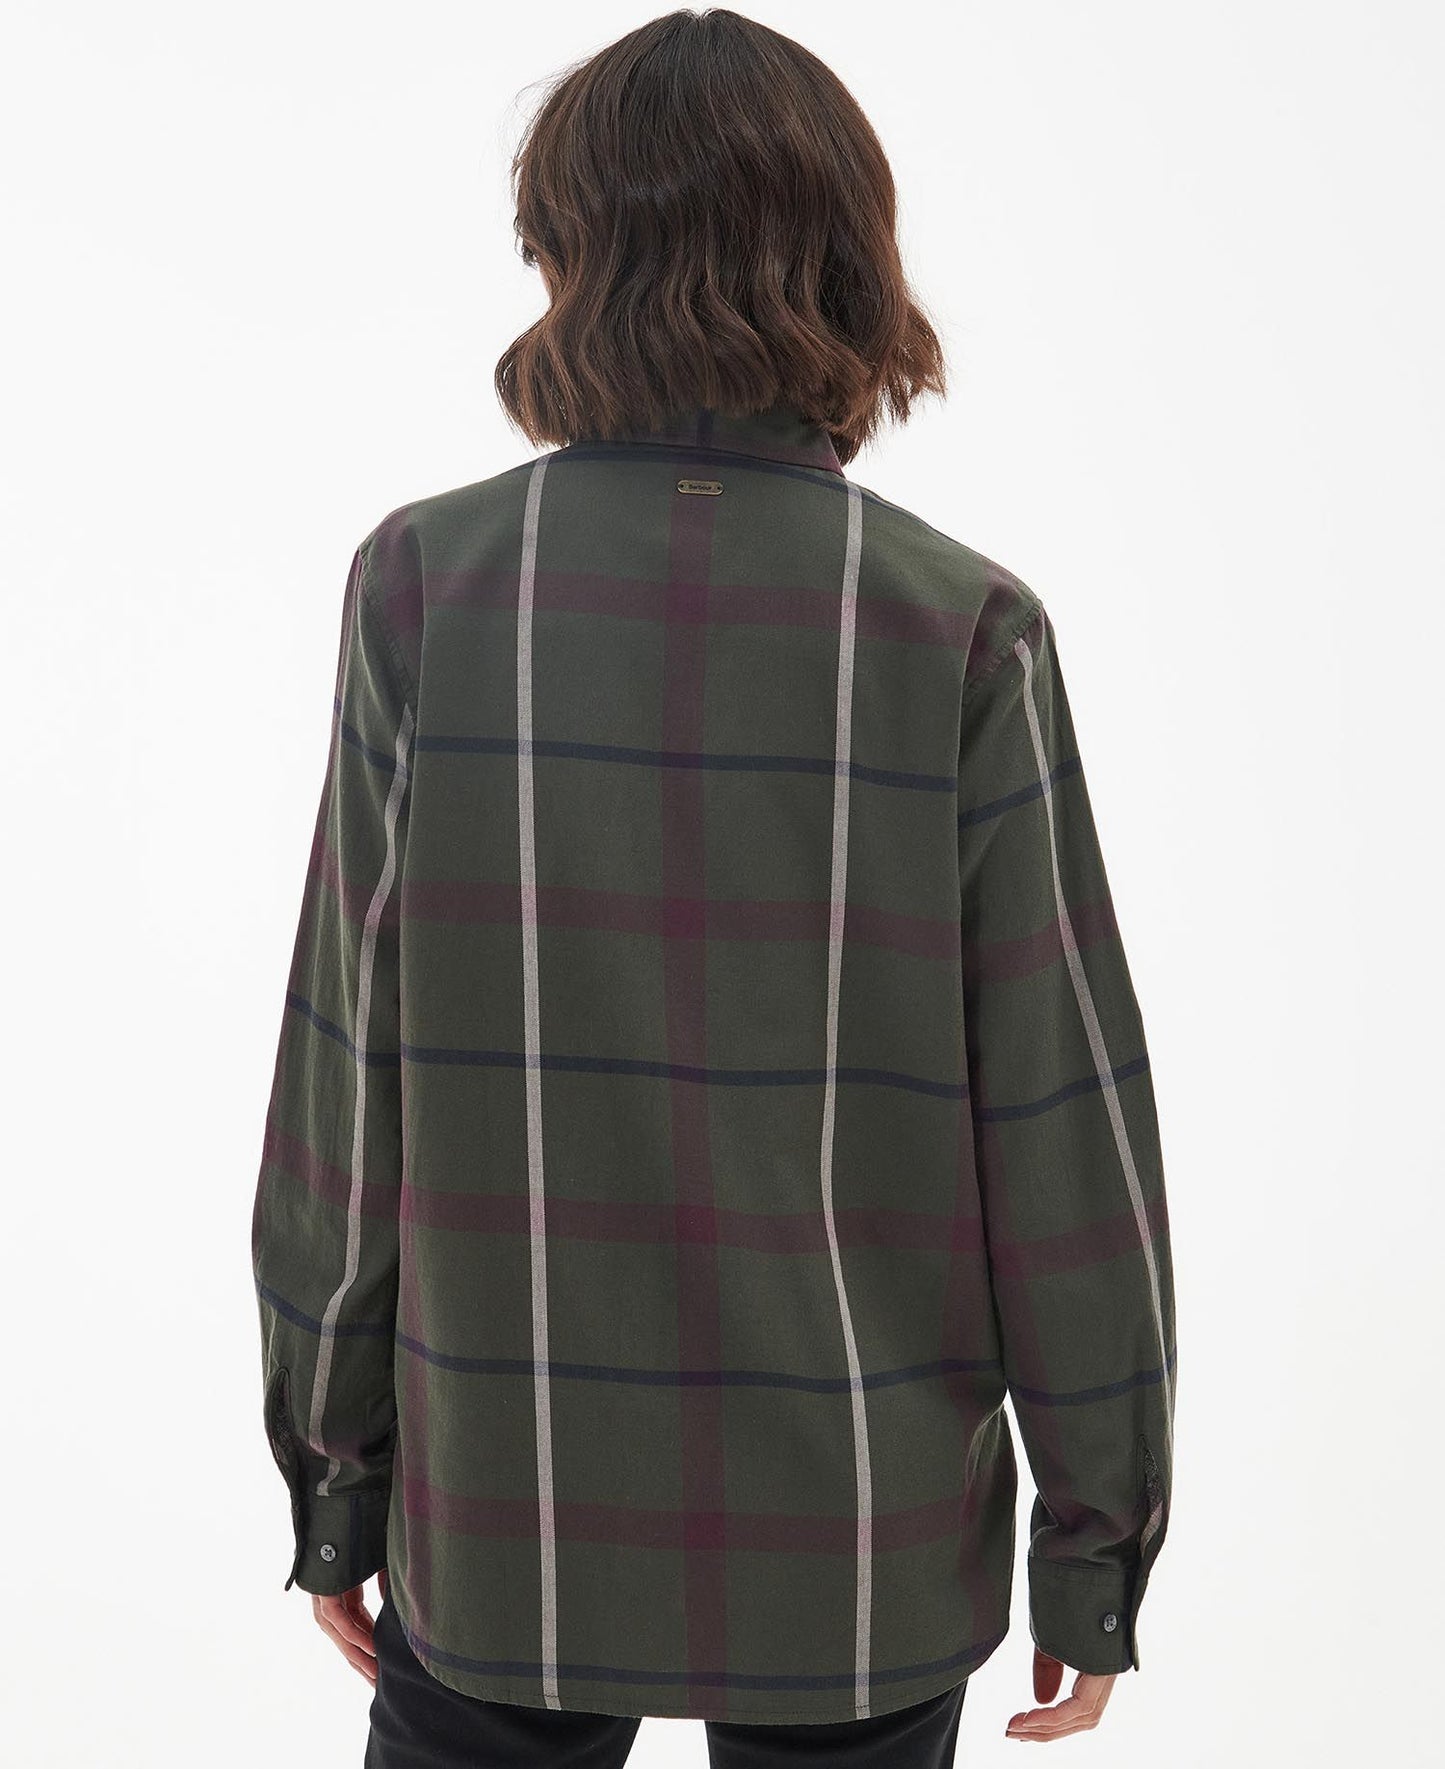 Barbour Shirt Woman Oxer Check